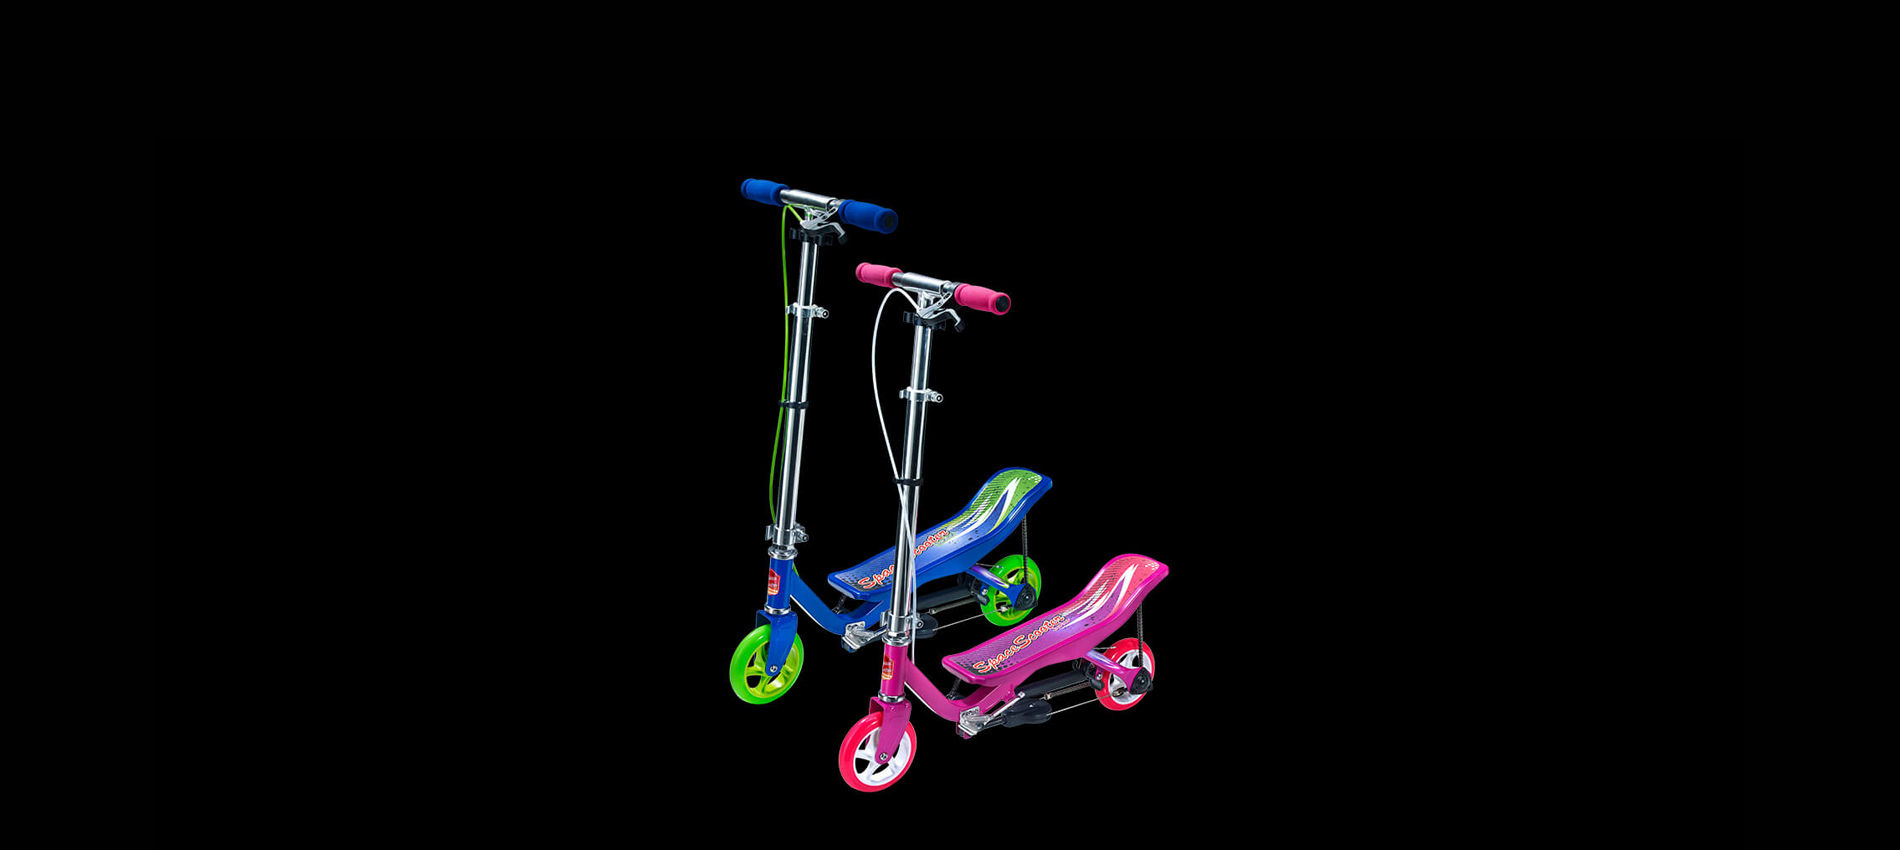 Space Scooter Junior X360 series